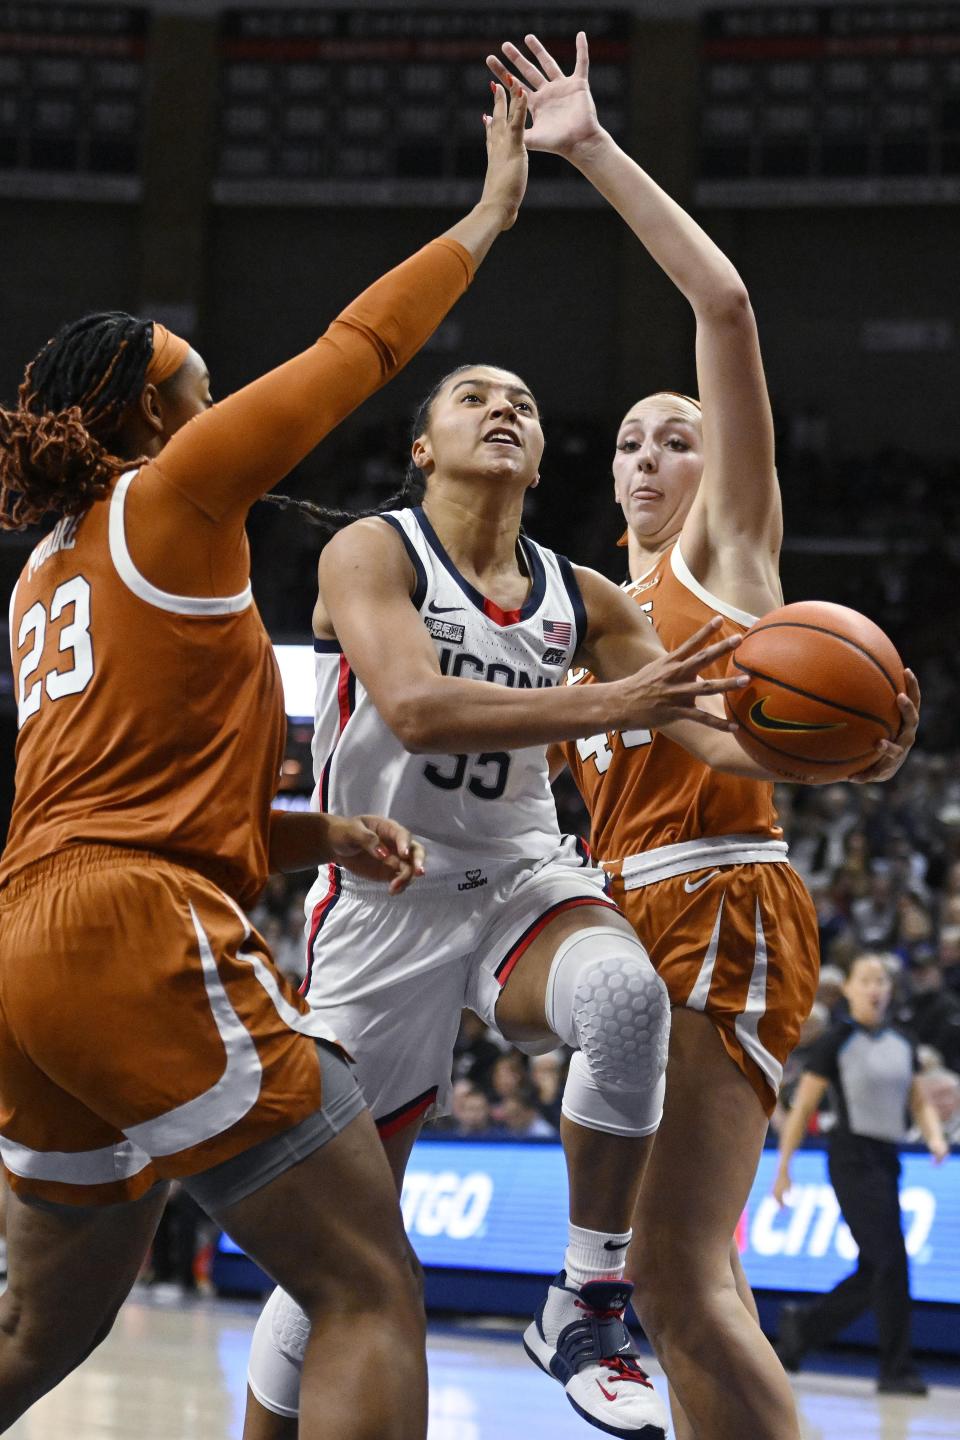 Connecticut's Azzi Fudd, center, splits the defense of Texas' Aaliyah Moore, left, and Taylor Jones, right, during the first half of an NCAA college basketball game, Monday, Nov. 14, 2022, in Storrs, Conn. (AP Photo/Jessica Hill)